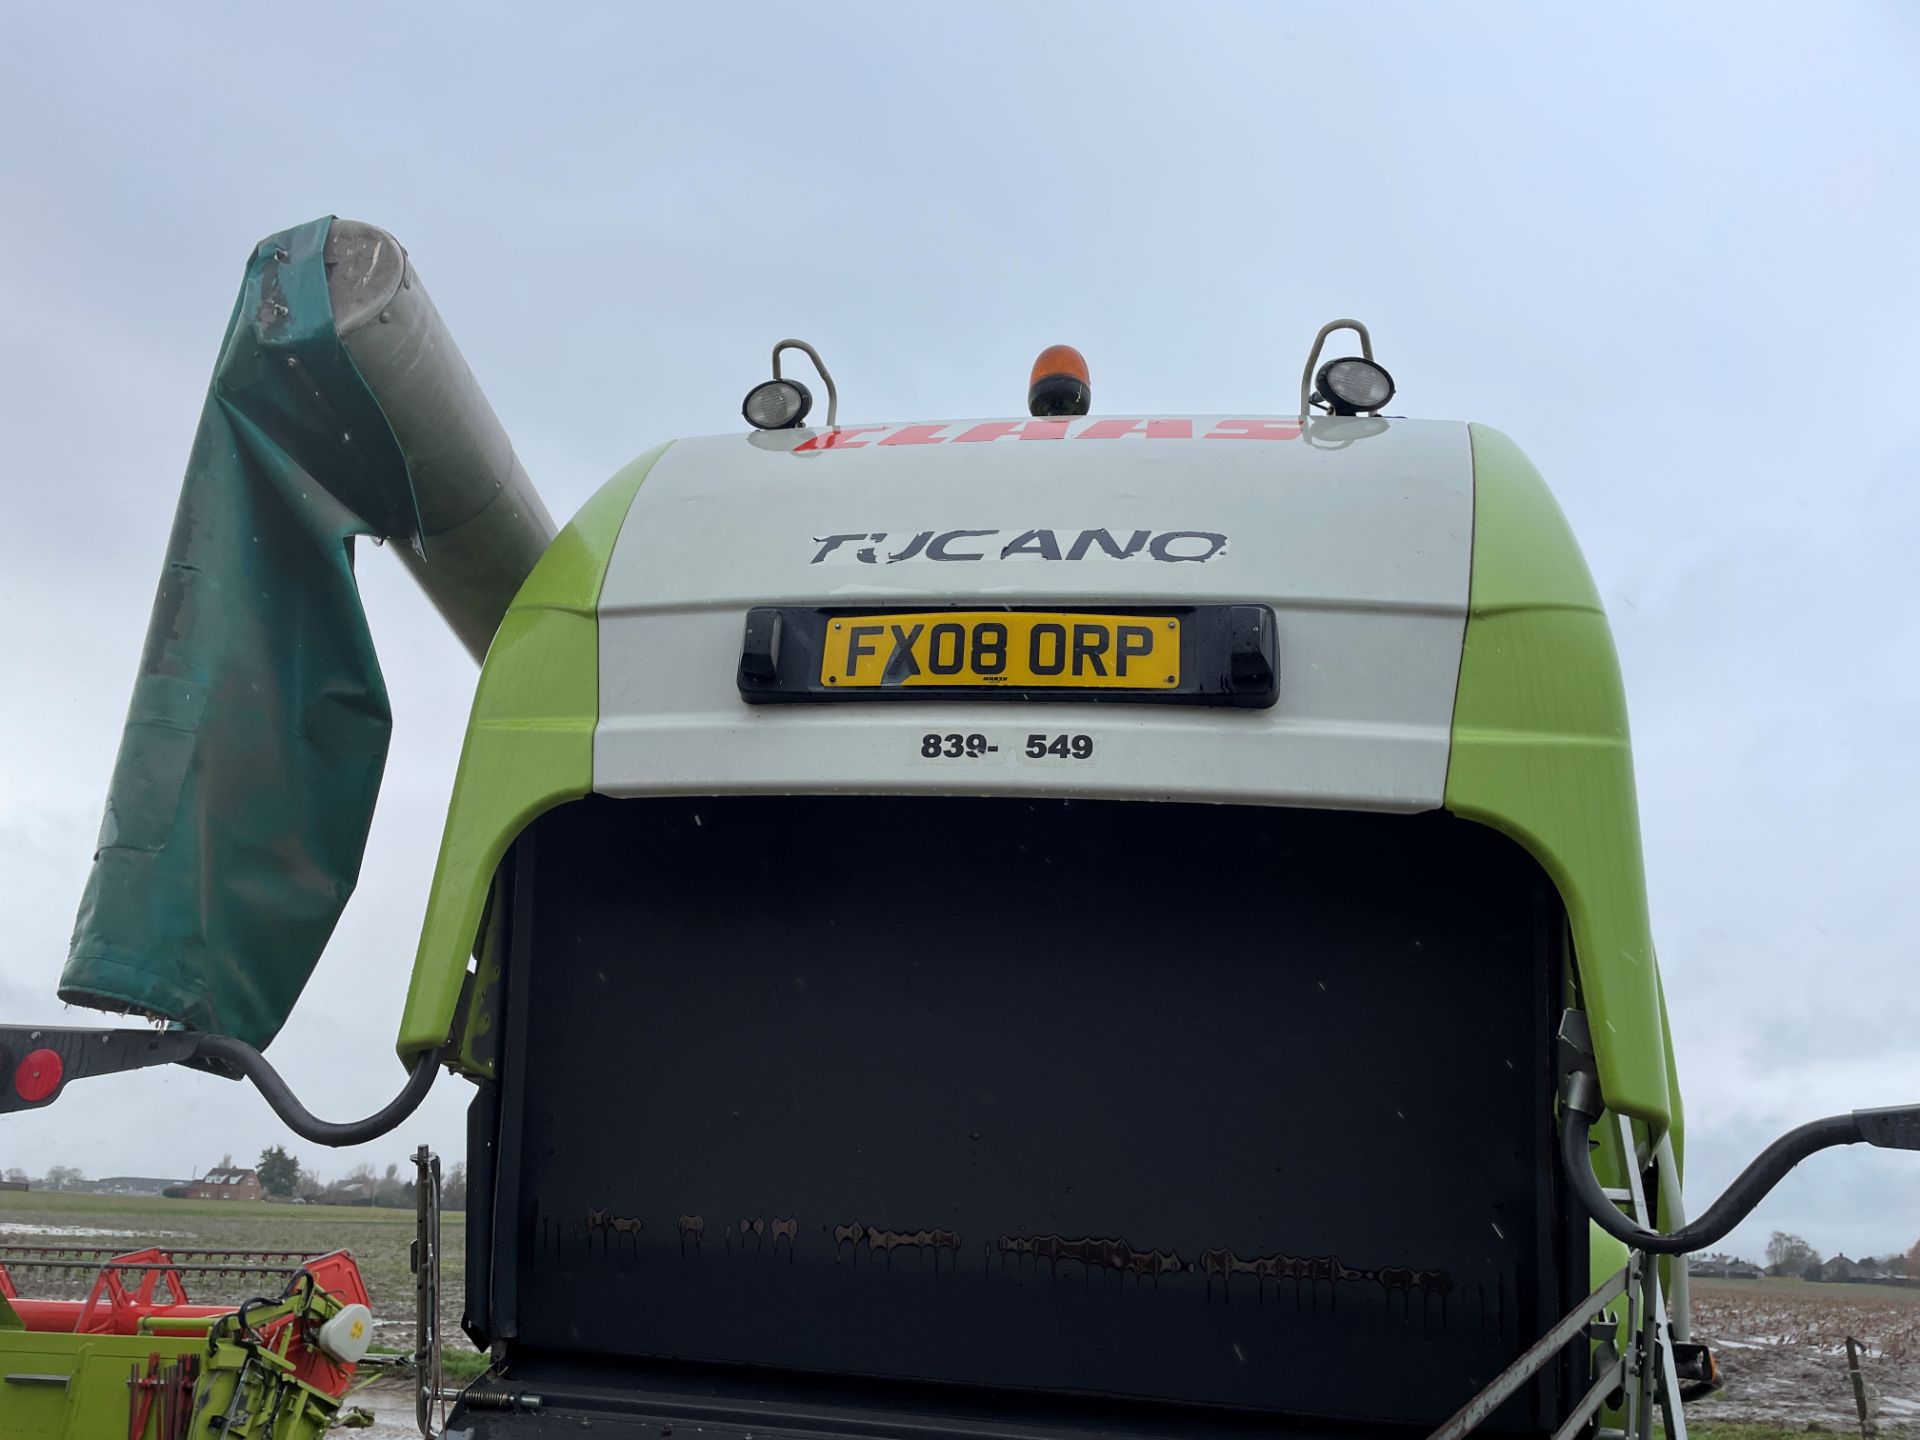 (08) Claas Tucano 450 combine harvester V600 6m Auto Contour cutterbar with trolley, APS Hybrid - Image 3 of 3